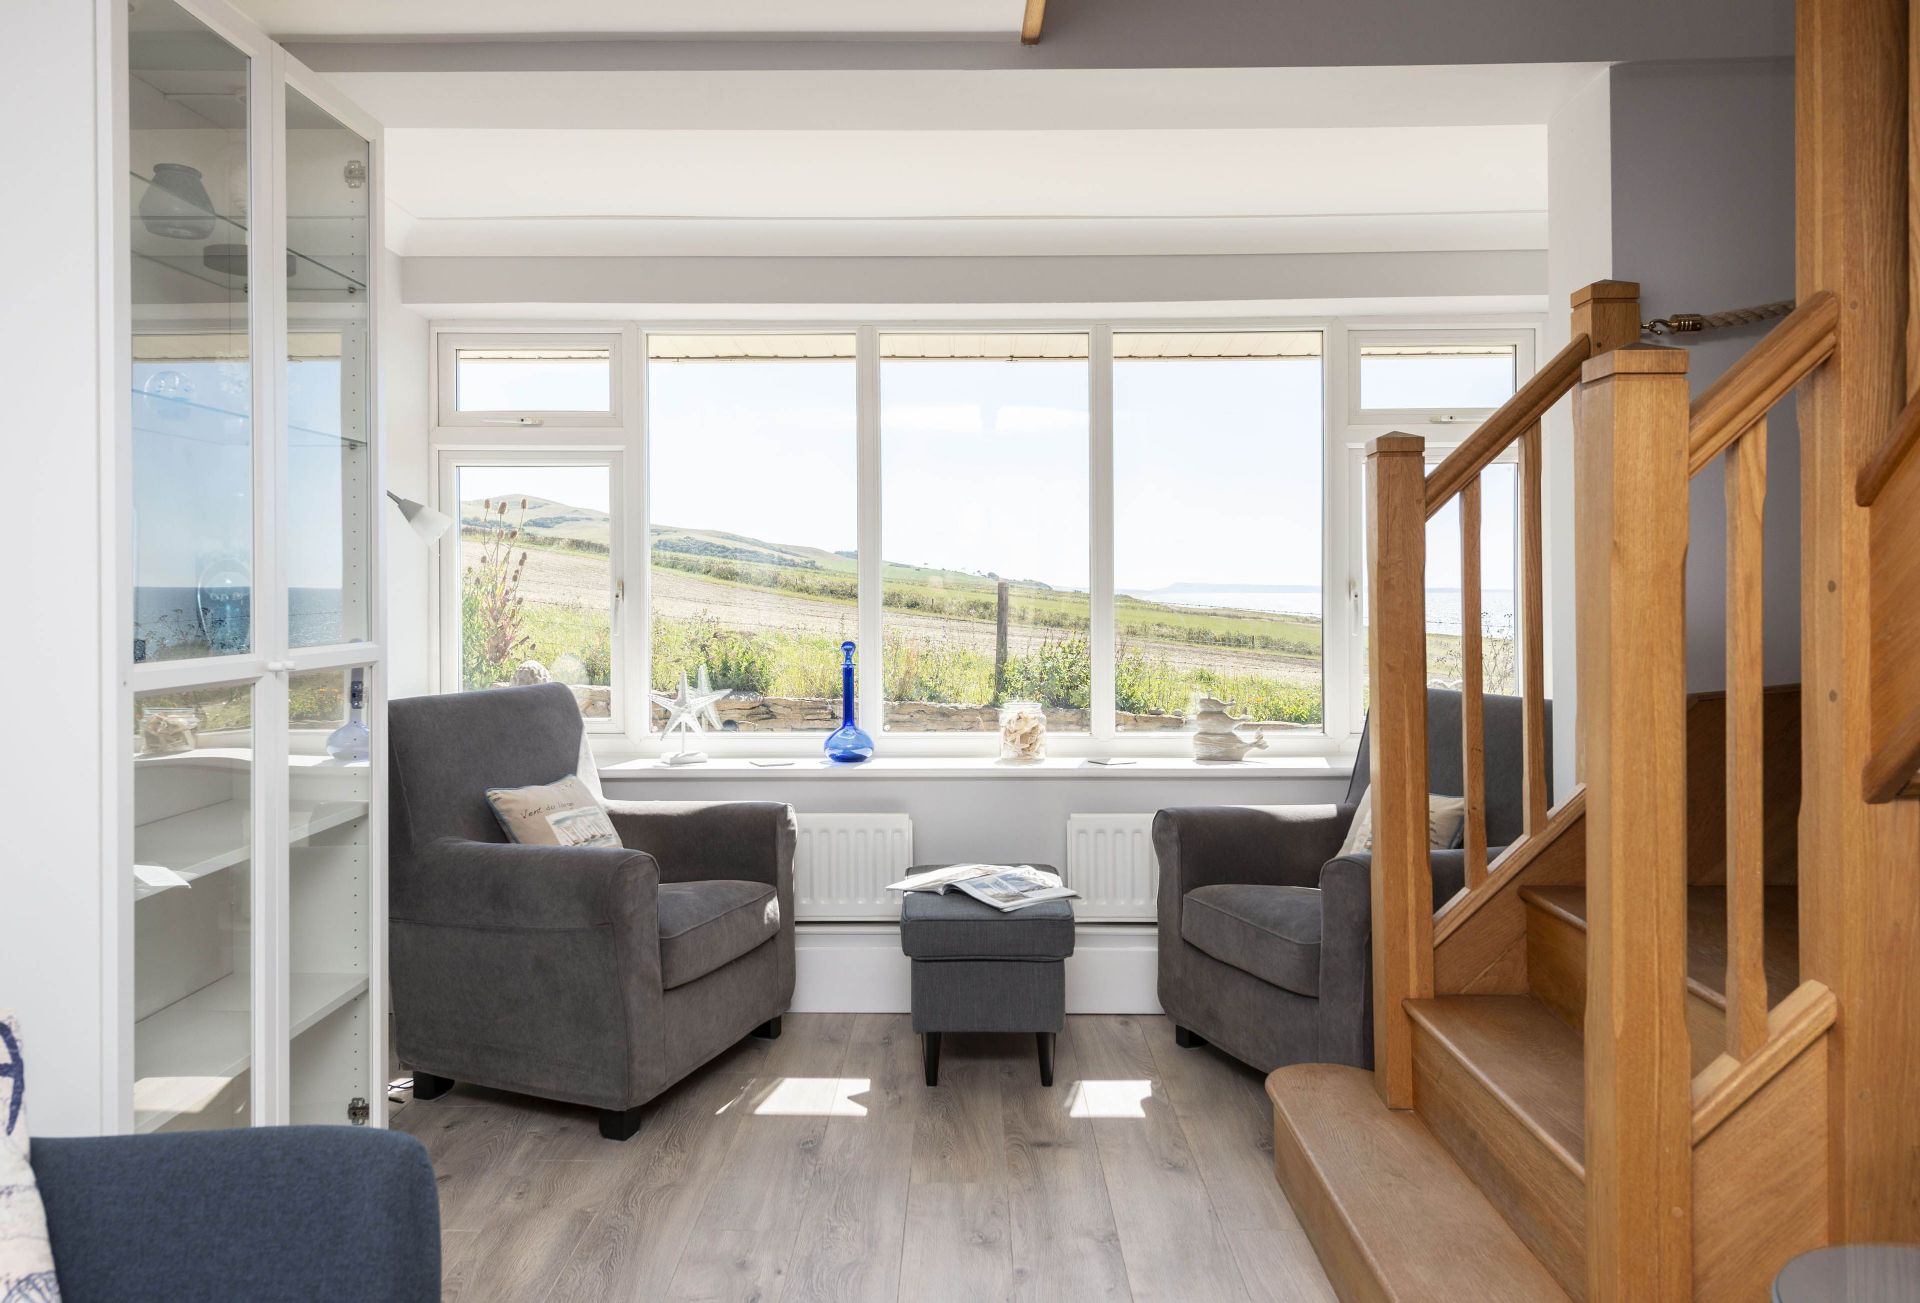 Details about a cottage Holiday at Chesil Watch